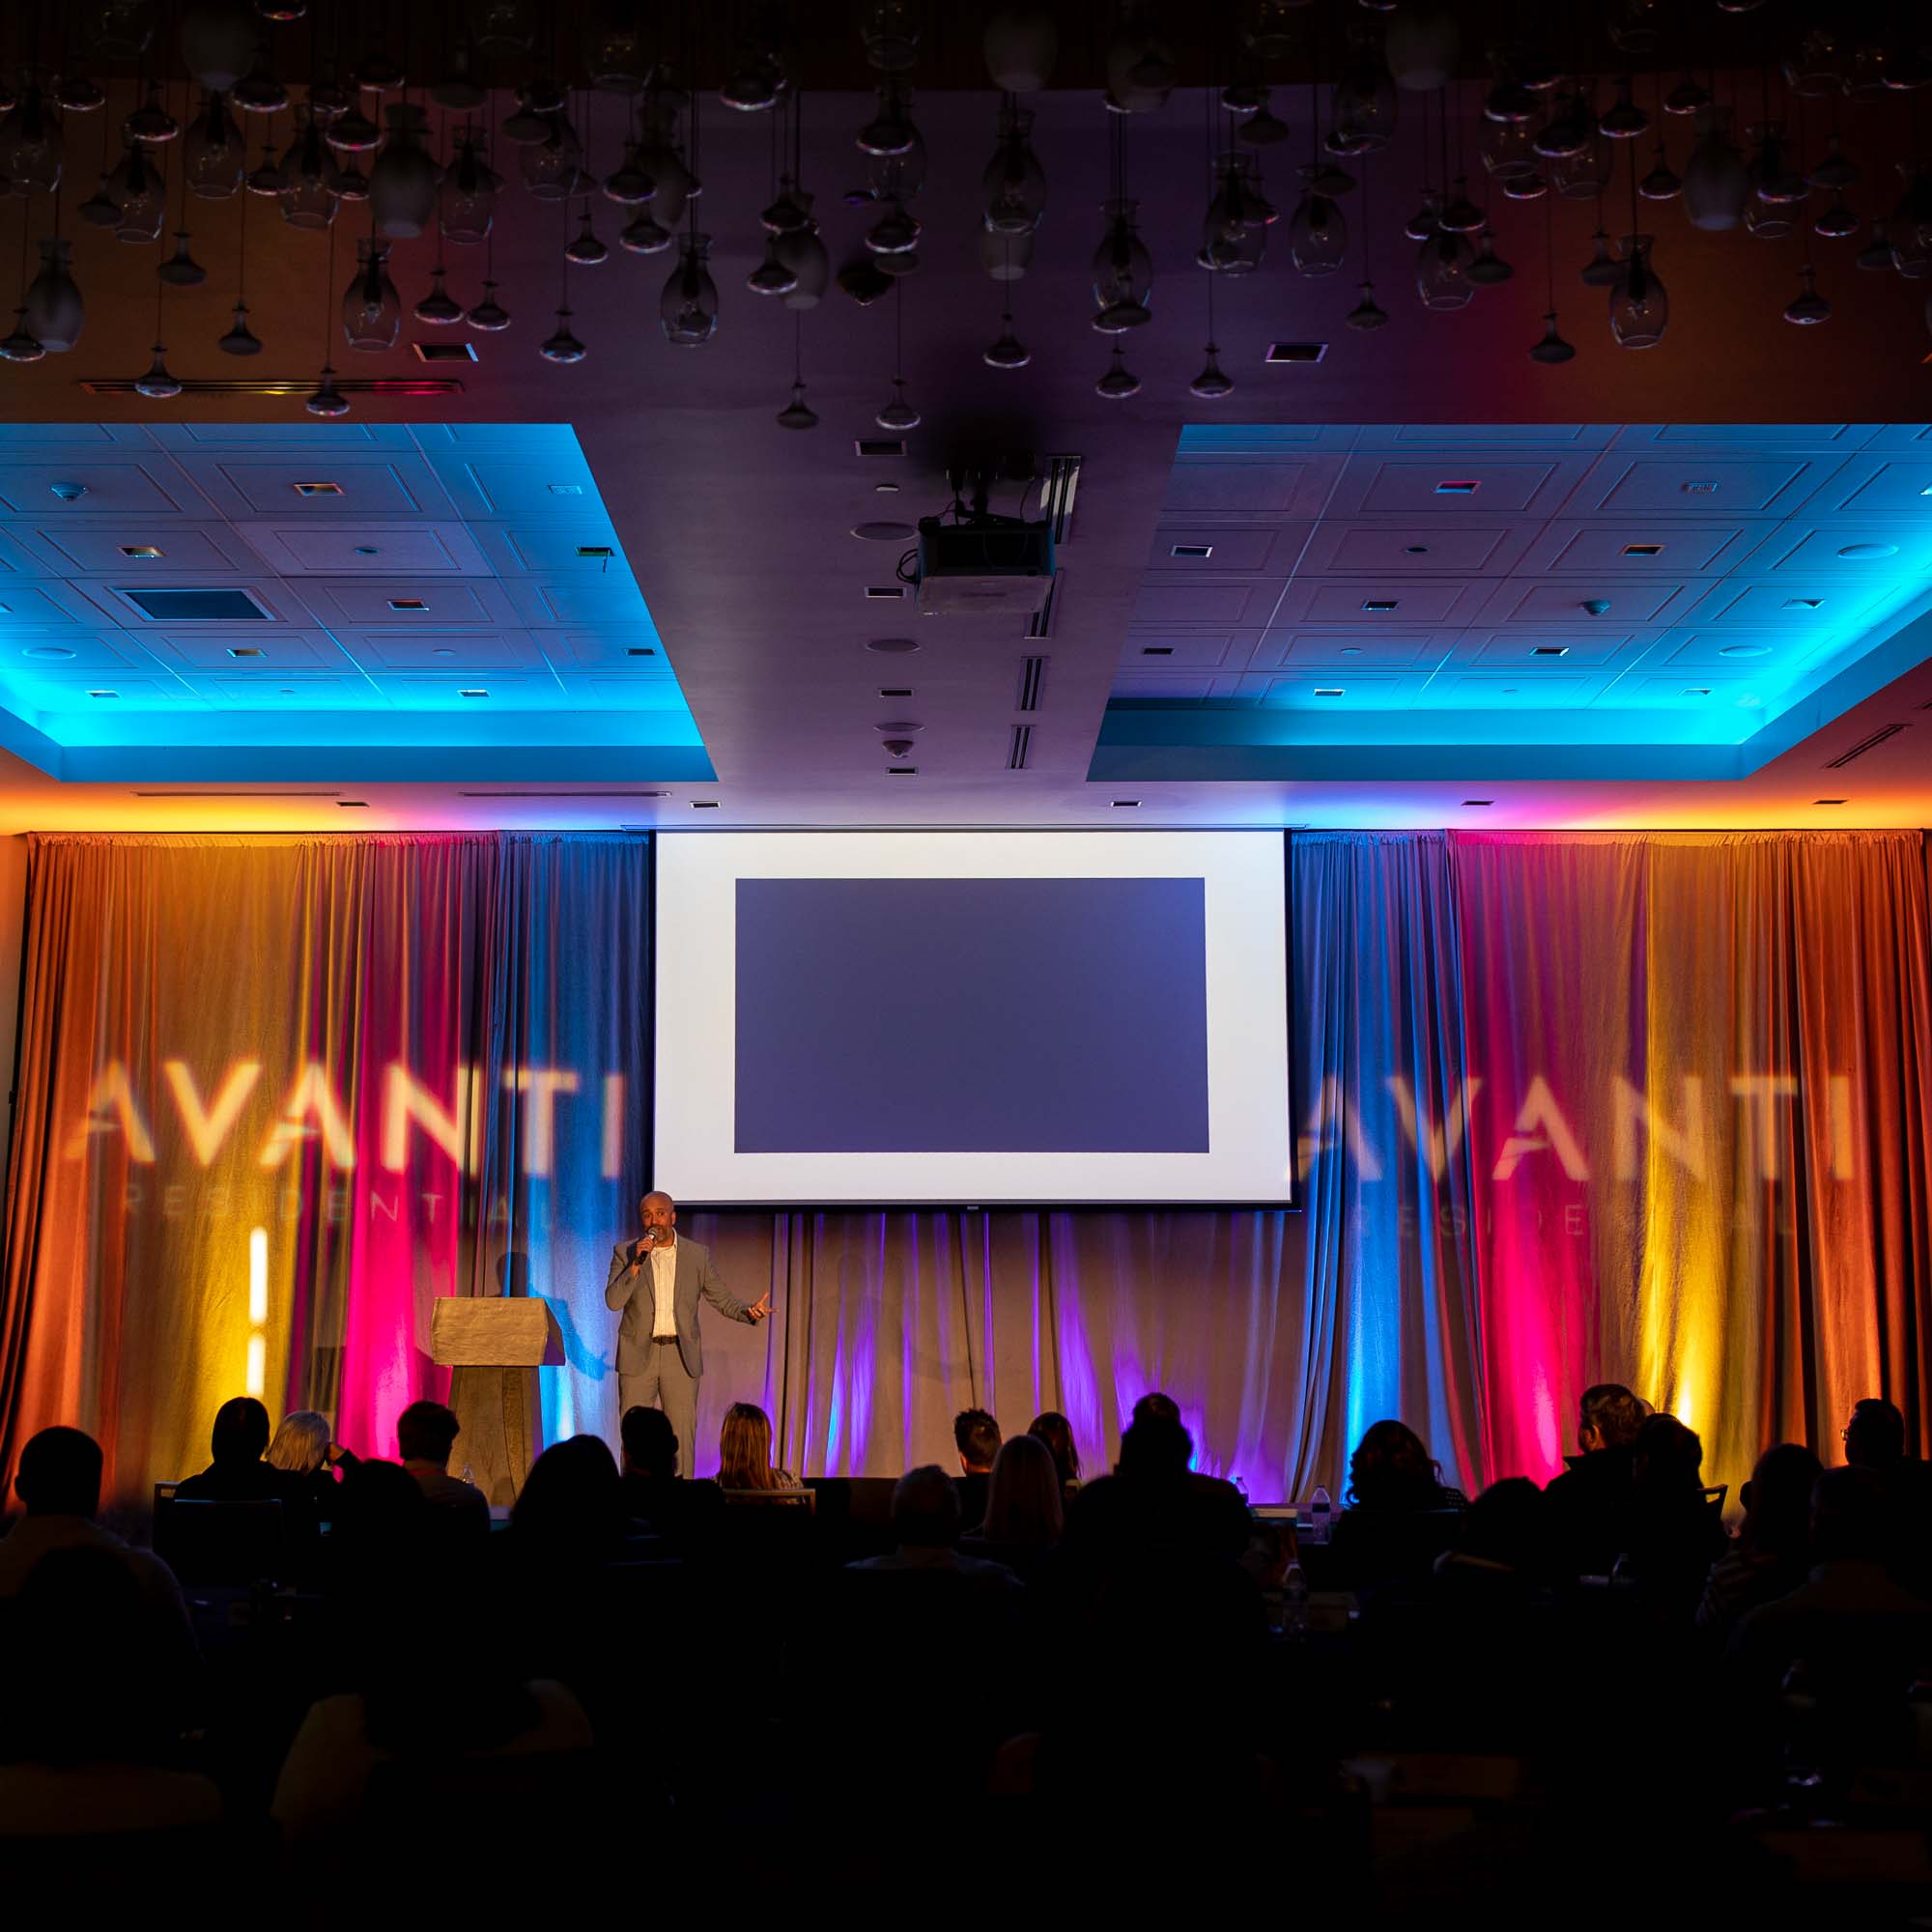 Executive gives speech on stage | Event Photographer Denver